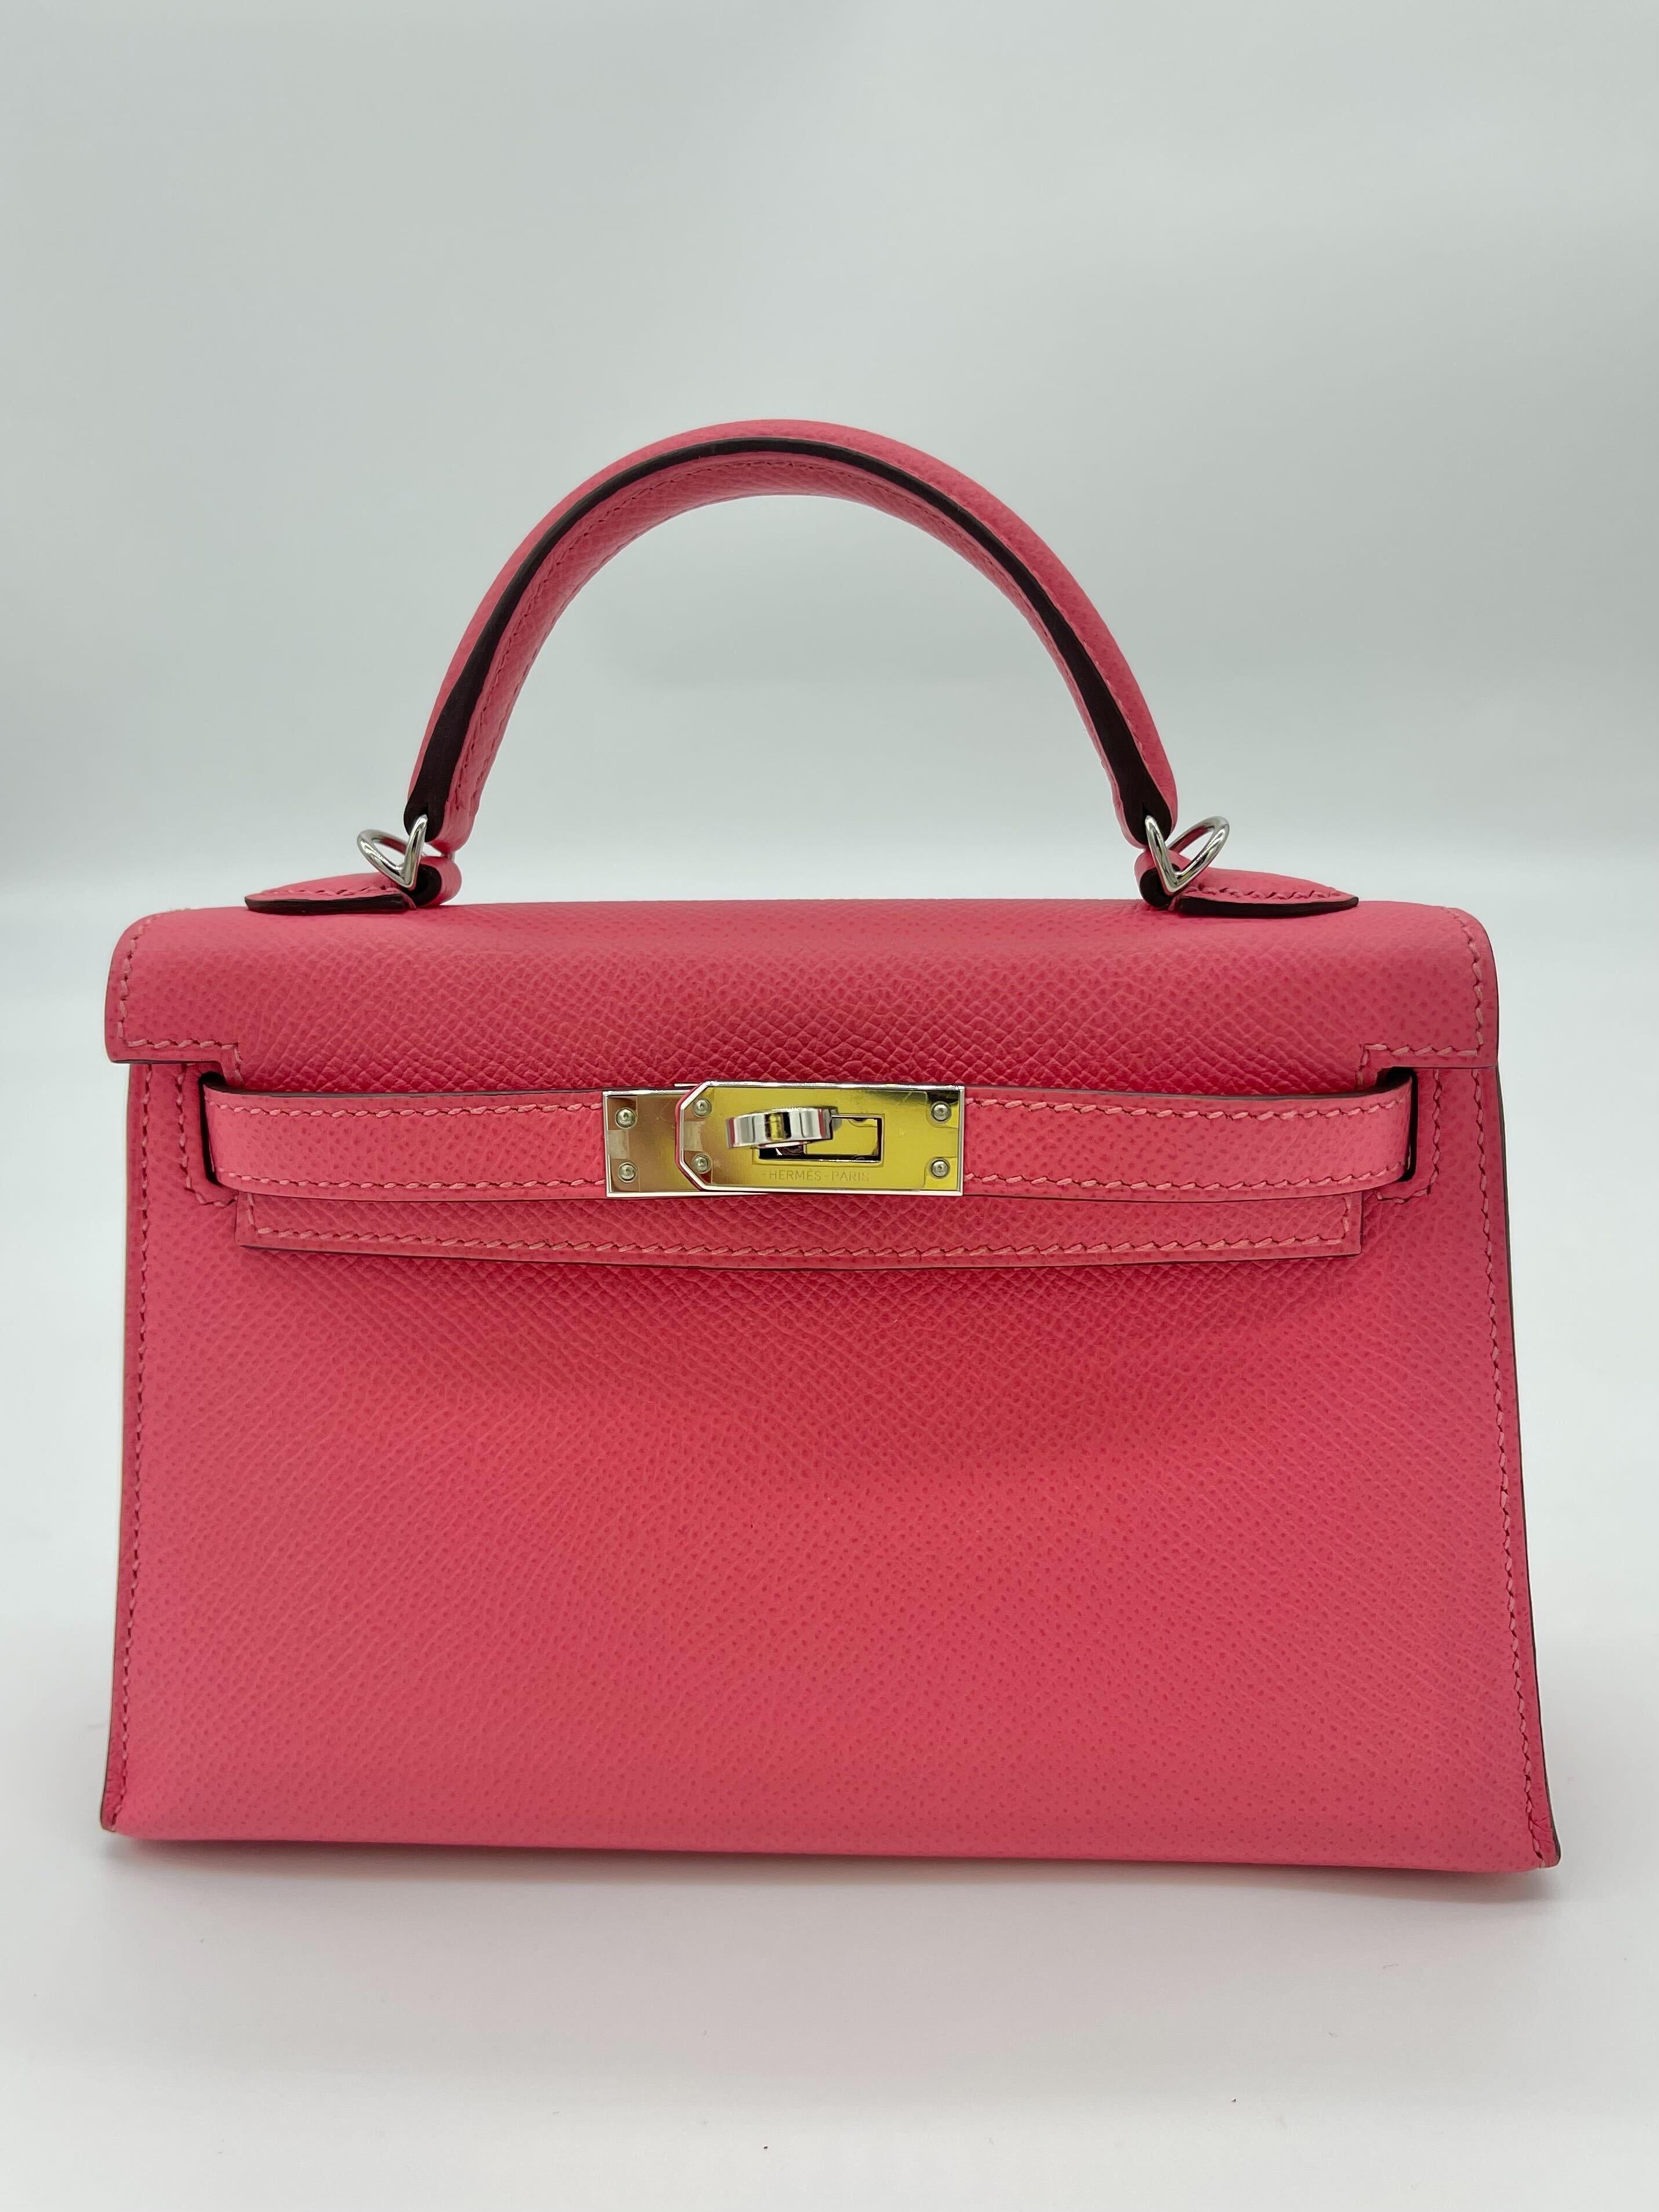 Hermes Mini Kelly II Sellier Rose Azalee Epsom Leather Palladium Hardware

Condition: Pre-owned
Material: Epsom Leather
Measurements: 20 cm x 12 cm x 6 cm
Hardware: Palladium

*Comes with box, original receipt, dust bag and rain cover.
*Has light